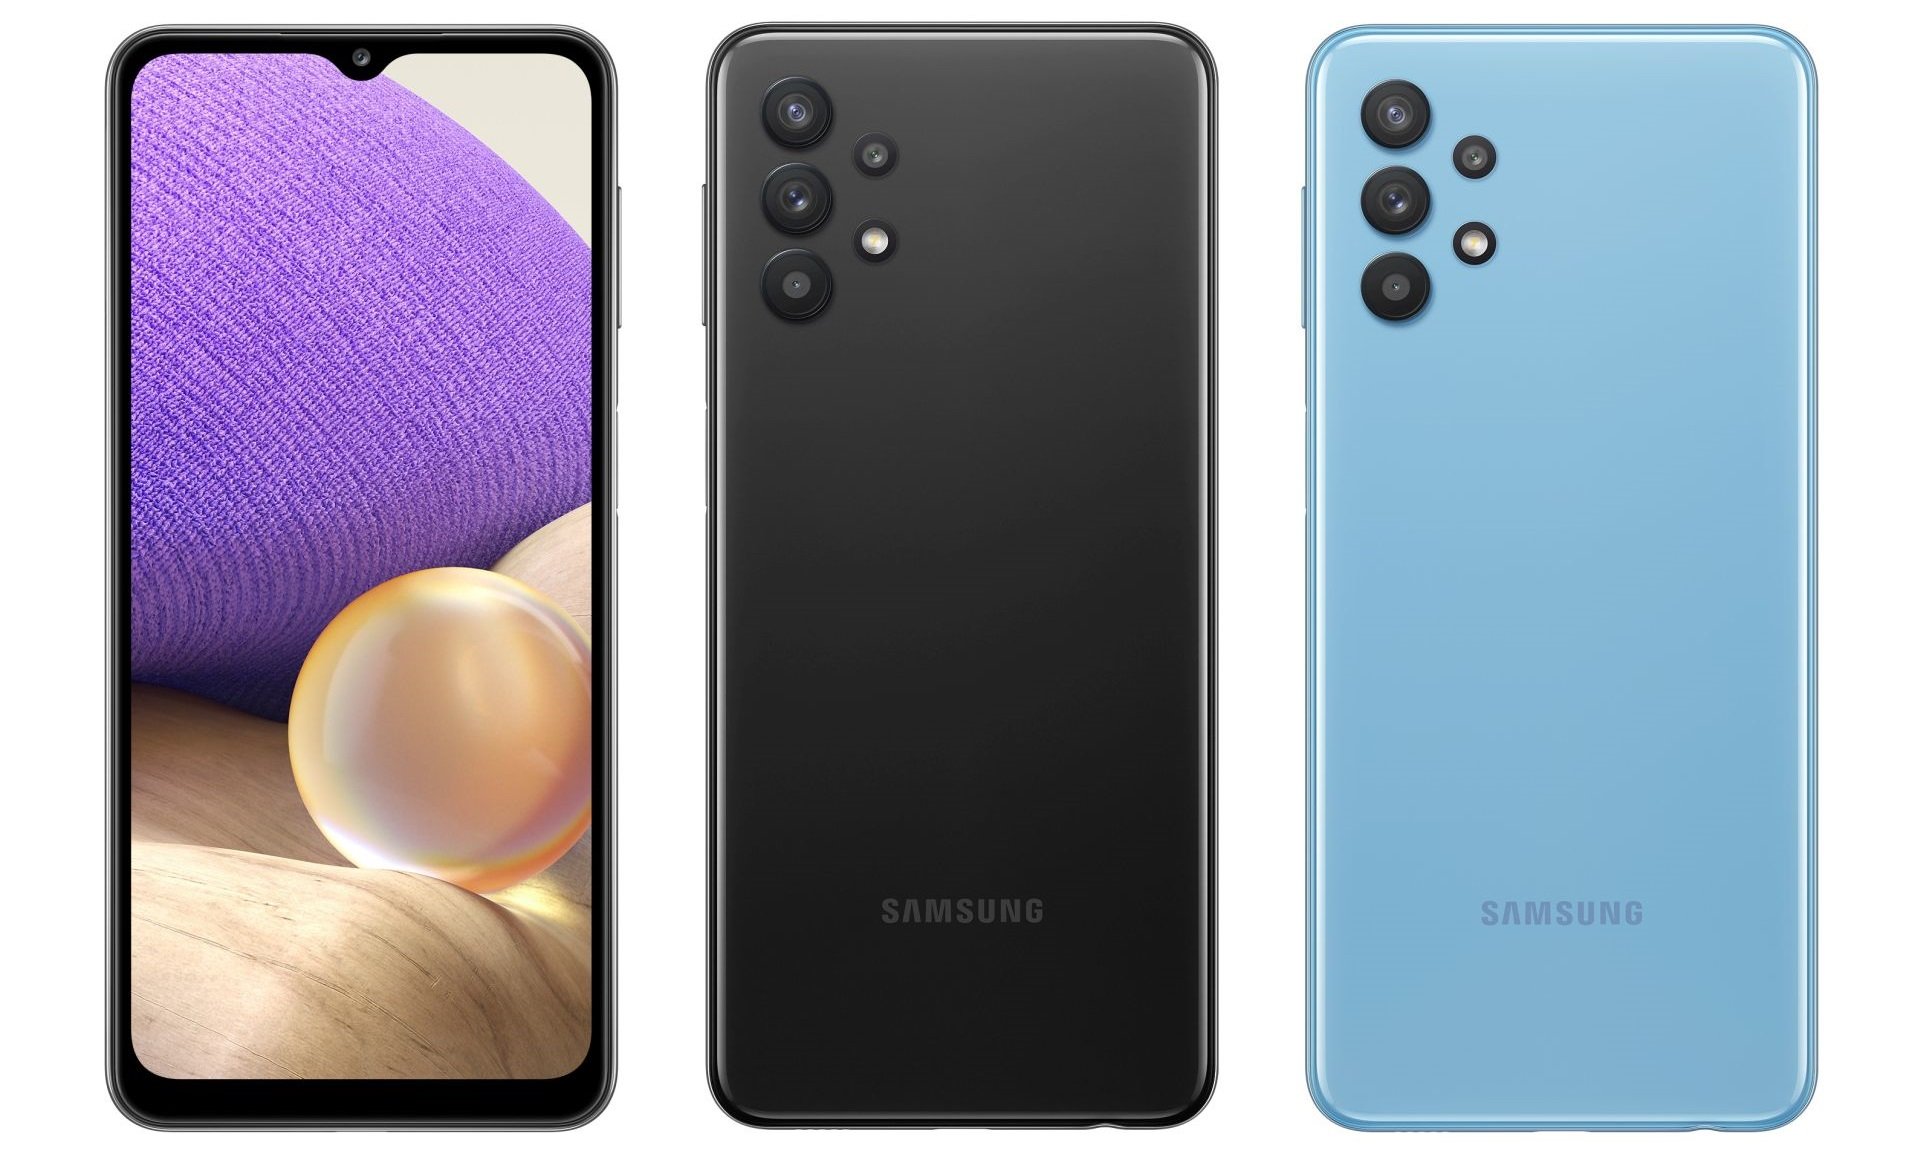 Samsung's cheapest 5G phone of 2021, the Galaxy A32 5G, is